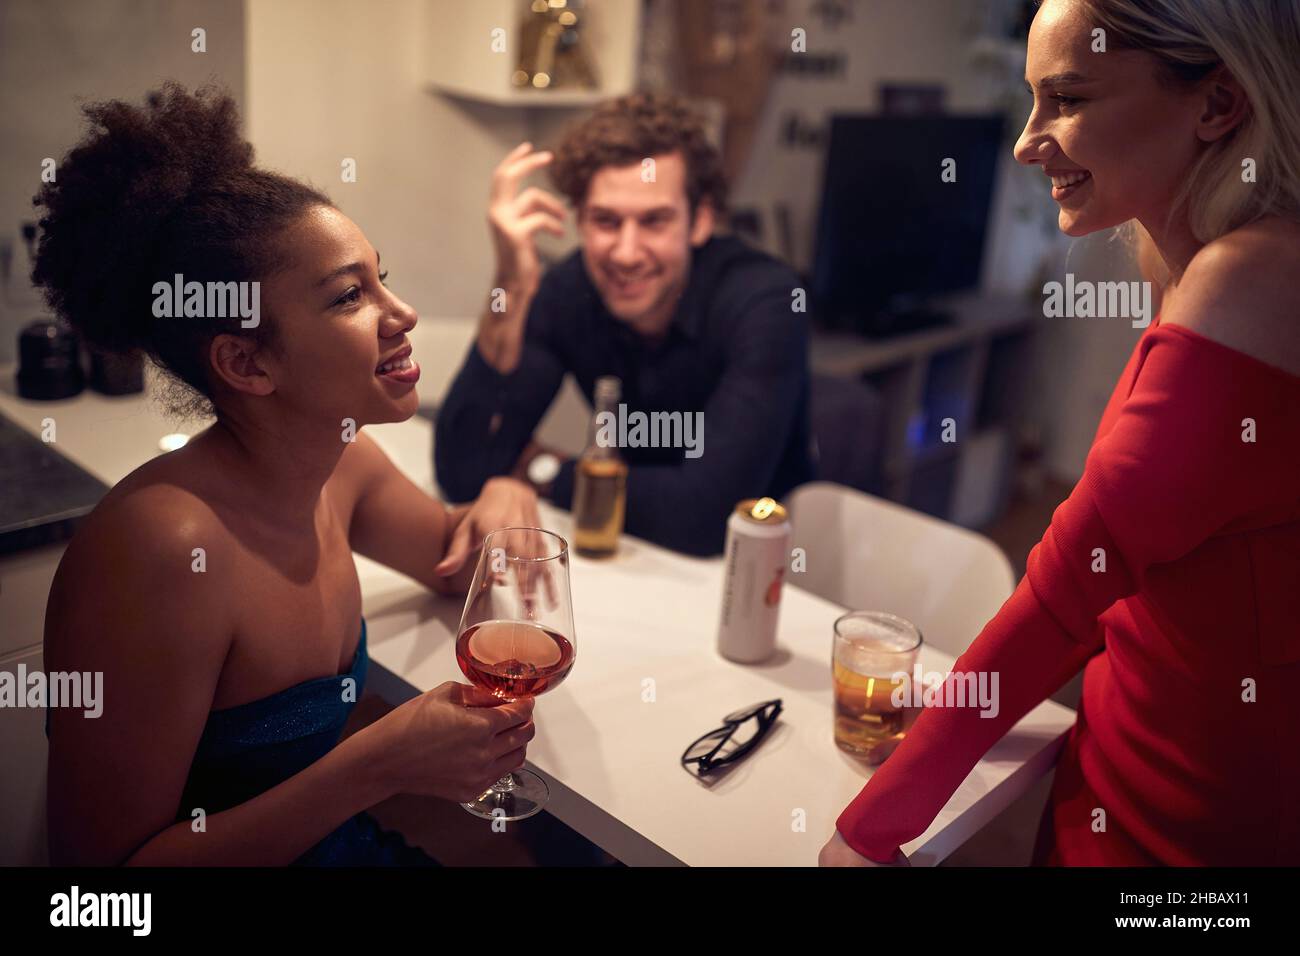 Group of festive friends celebrating the New Year together indoors; Private party concept Stock Photo